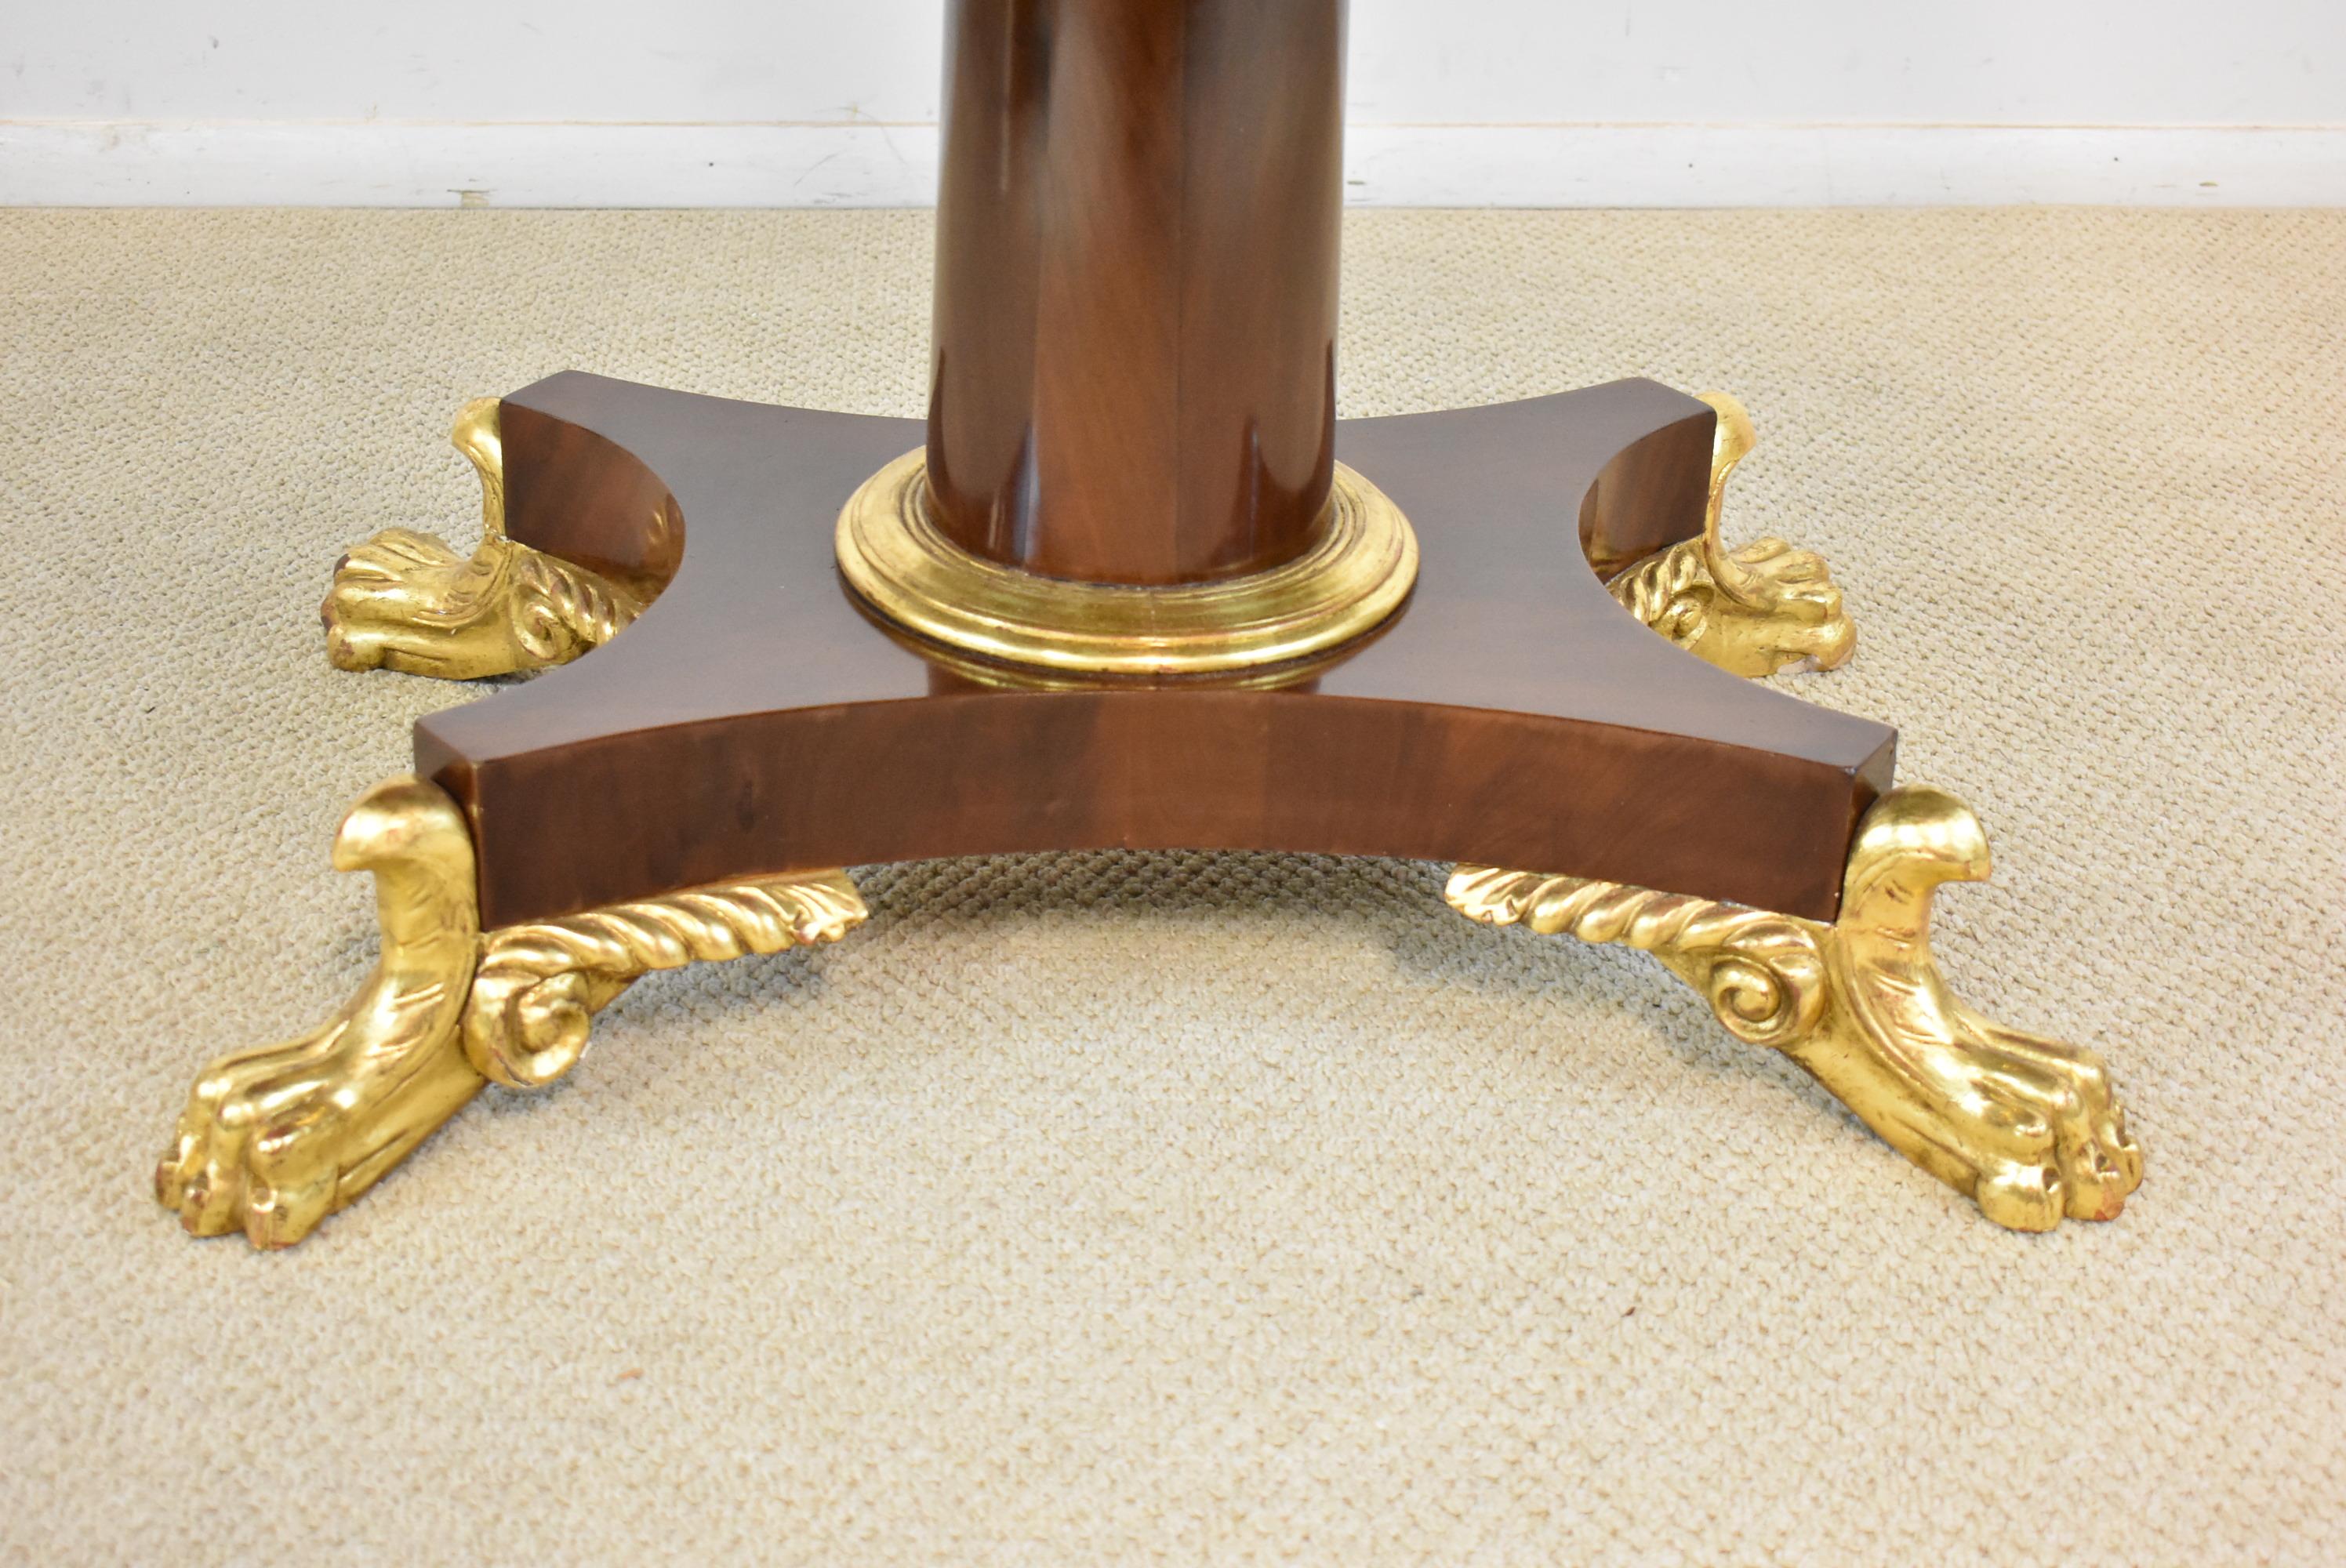 19th Century French Empire Round Mahogany Center Table with Gold Gilt Paw Feet